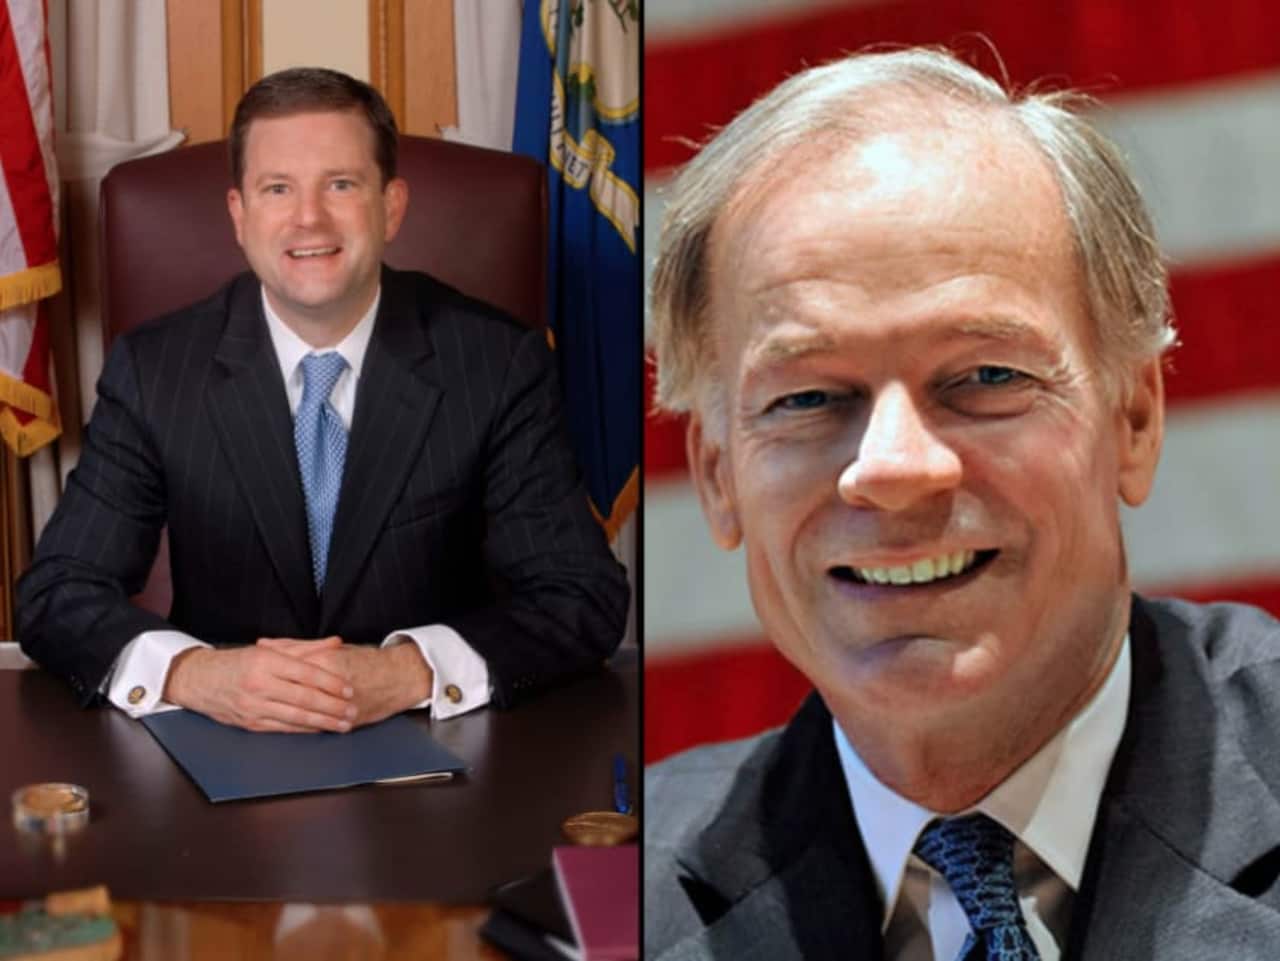 New Canaan Republicans will choose between state Sen. John McKinney, of Fairfield left, and Greenwich's Tom Foley in Tuesday's primary.